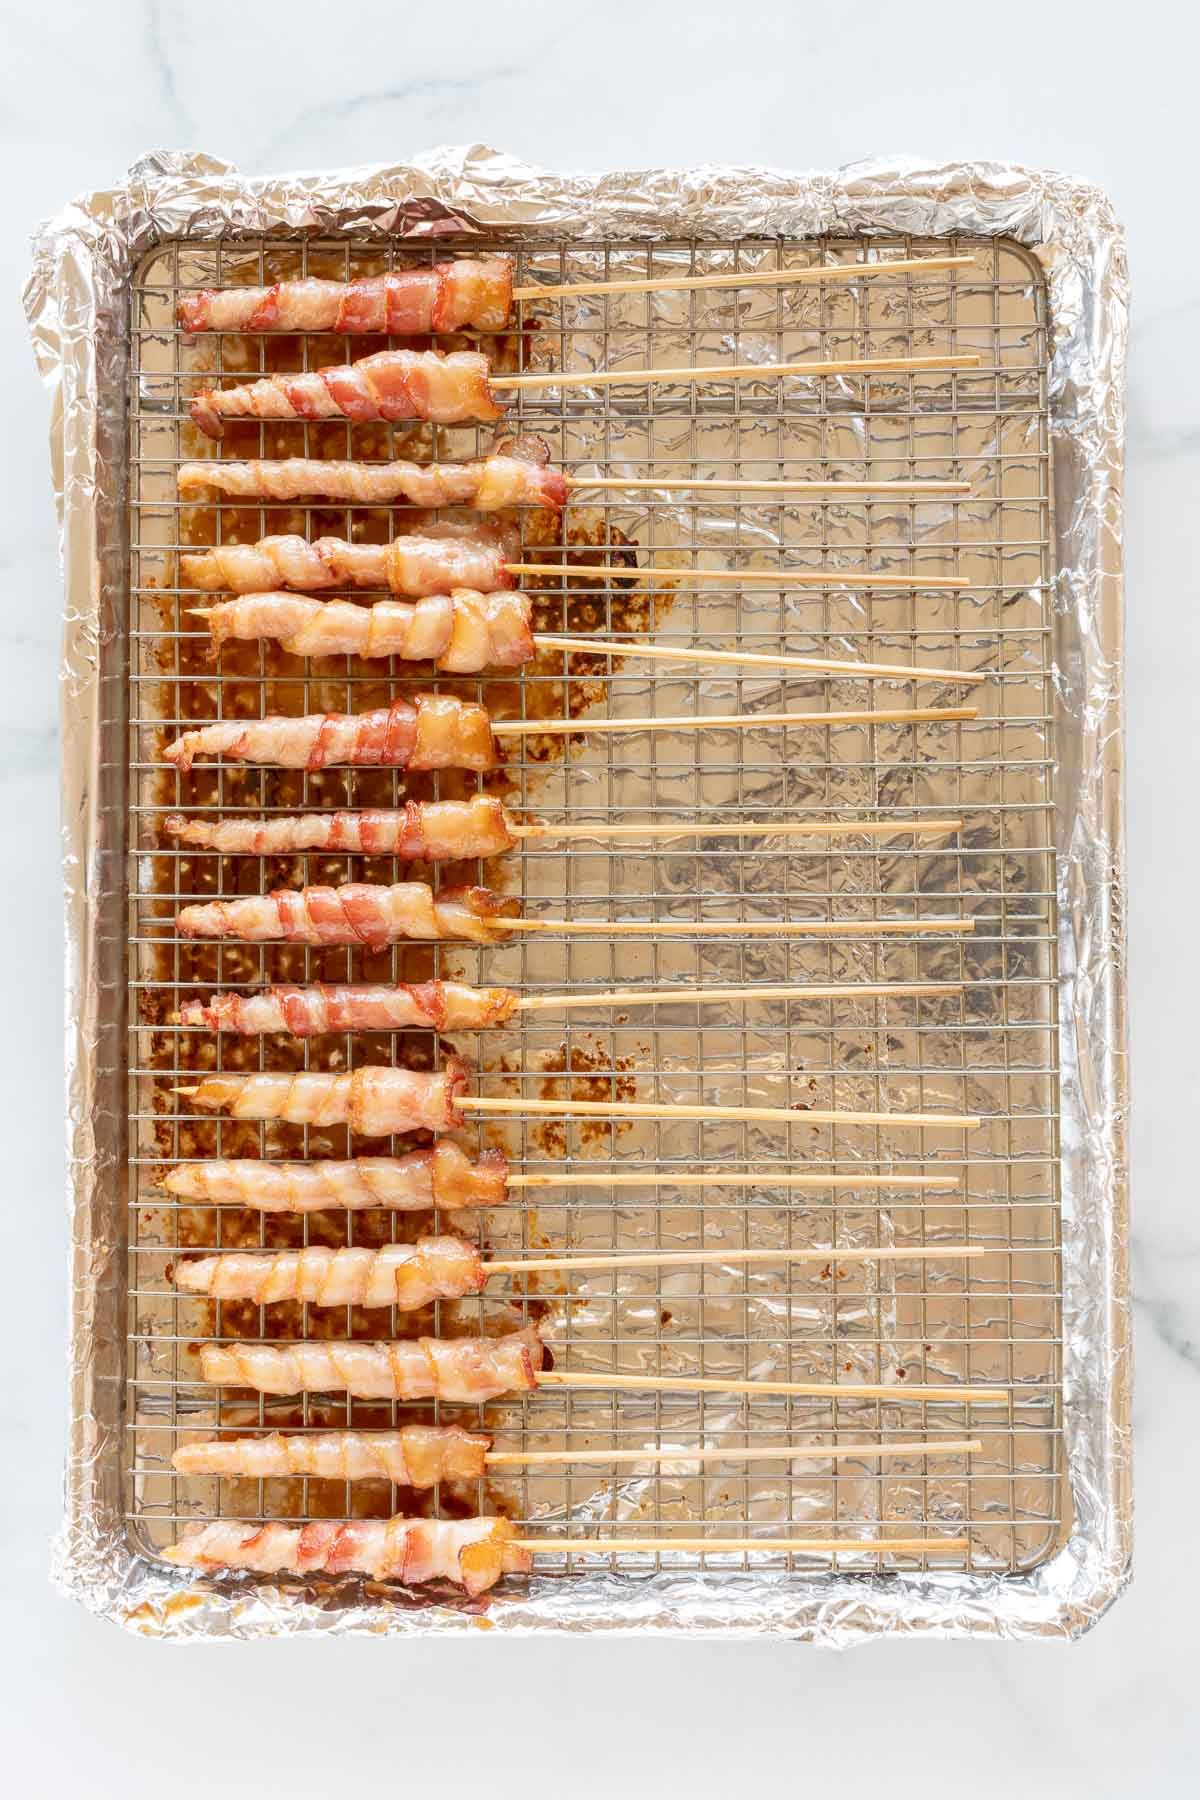 Caramel bacon on skewers, laid out on a baking sheet